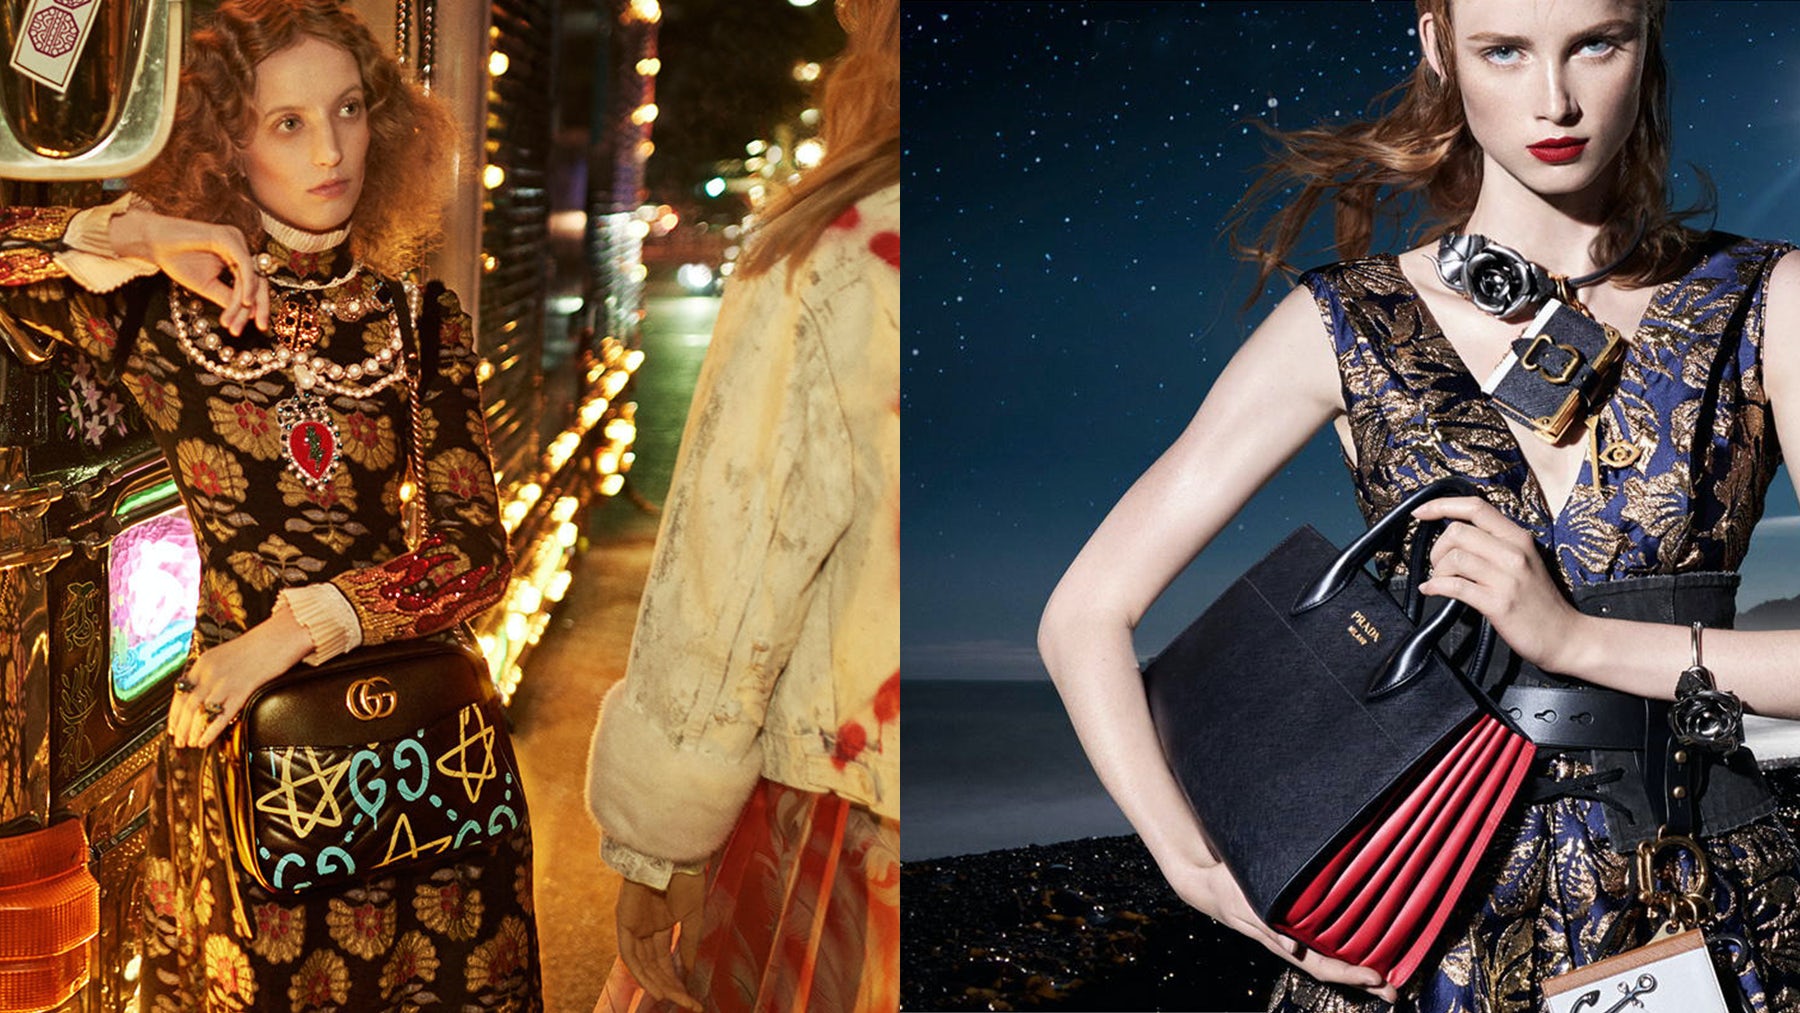 Gucci Among World's Hottest Fashion Brands, While Prada Cools | BoF